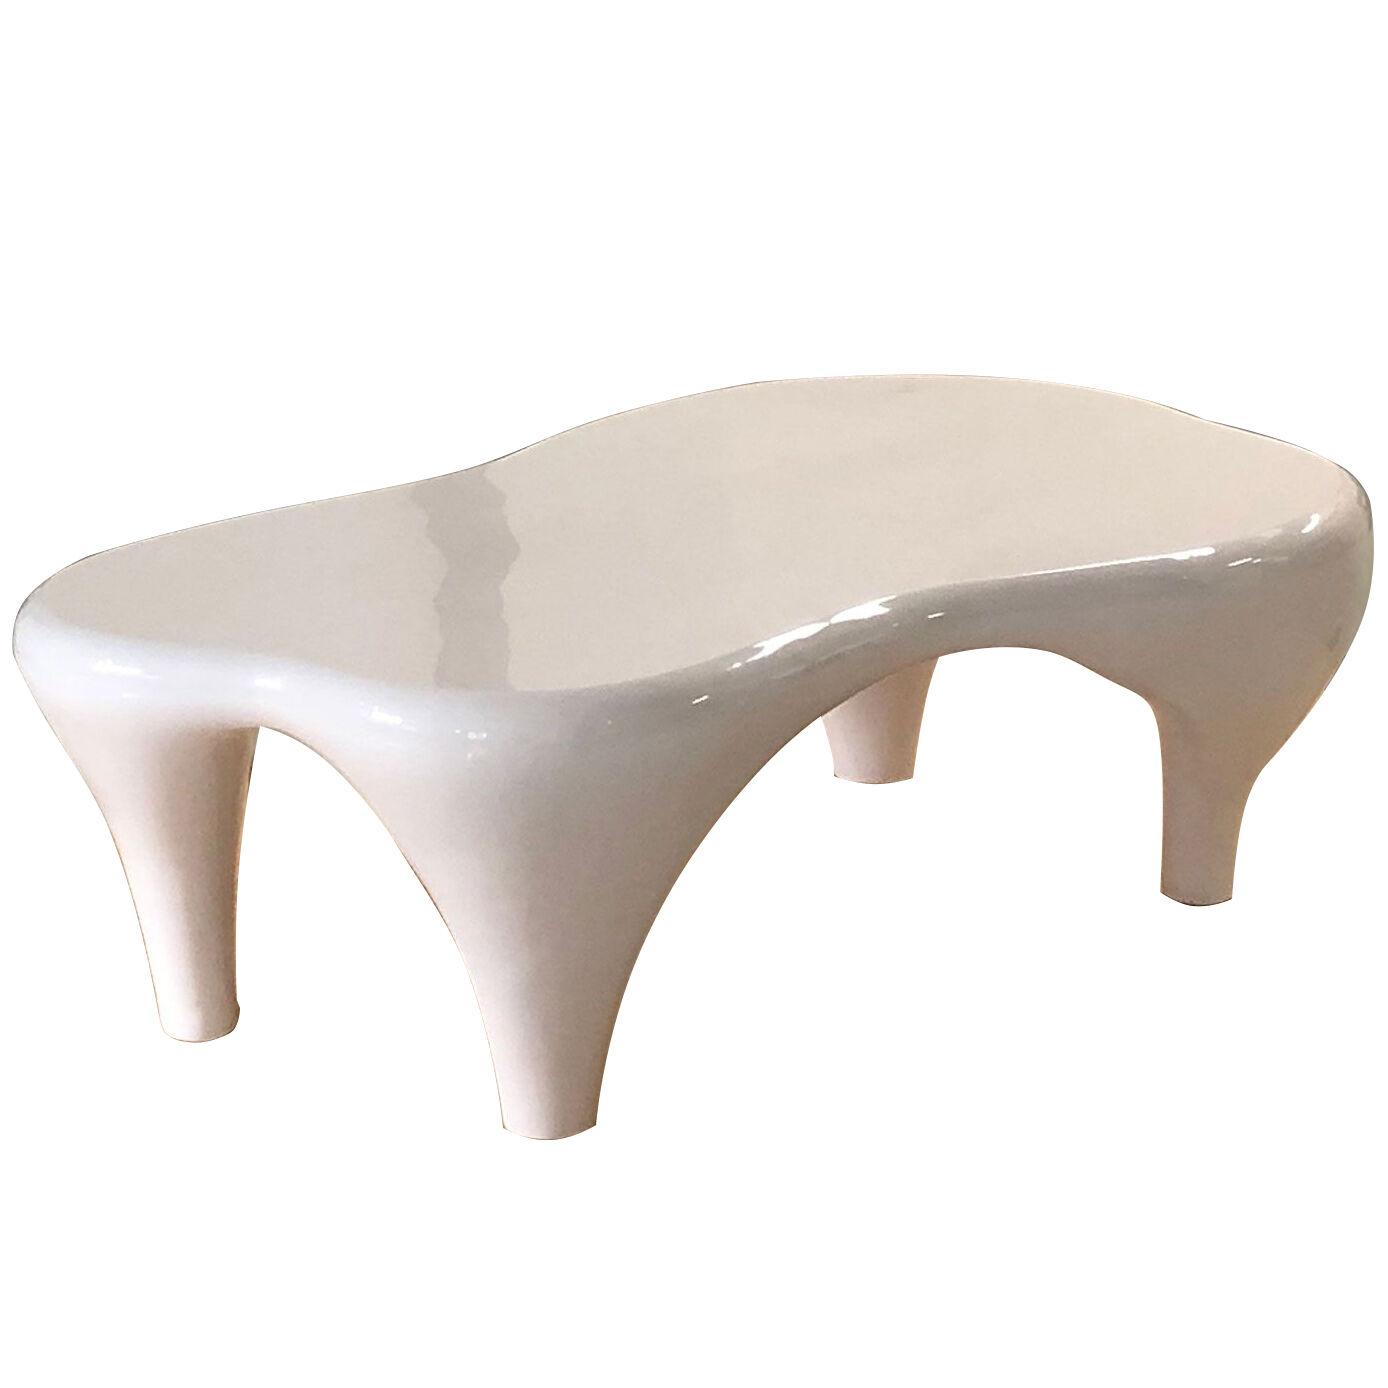 Coffee Table "Toro" in white lacquer